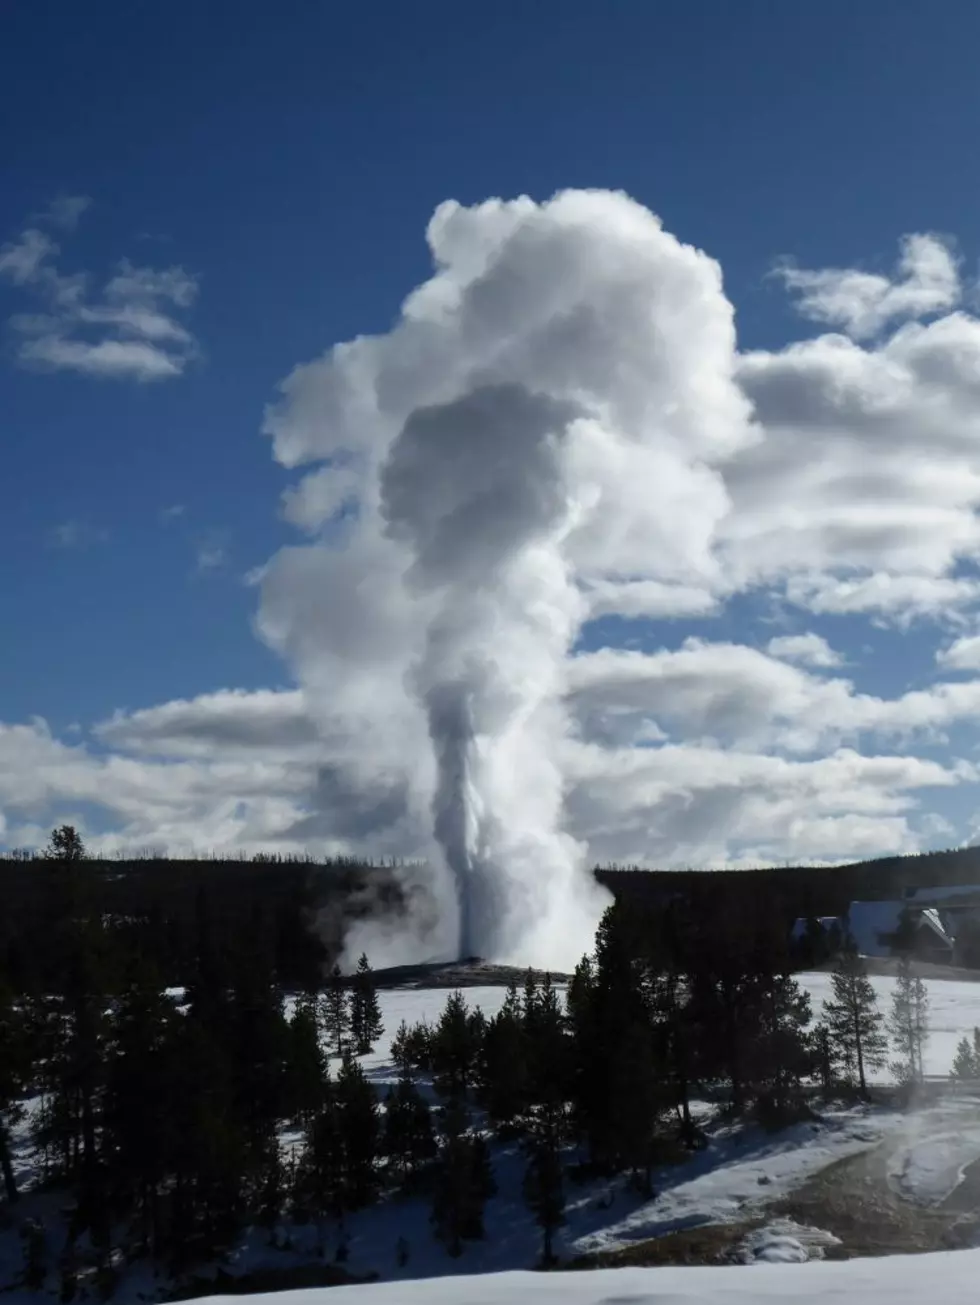 Should Yellowstone National Park install WiFi network?